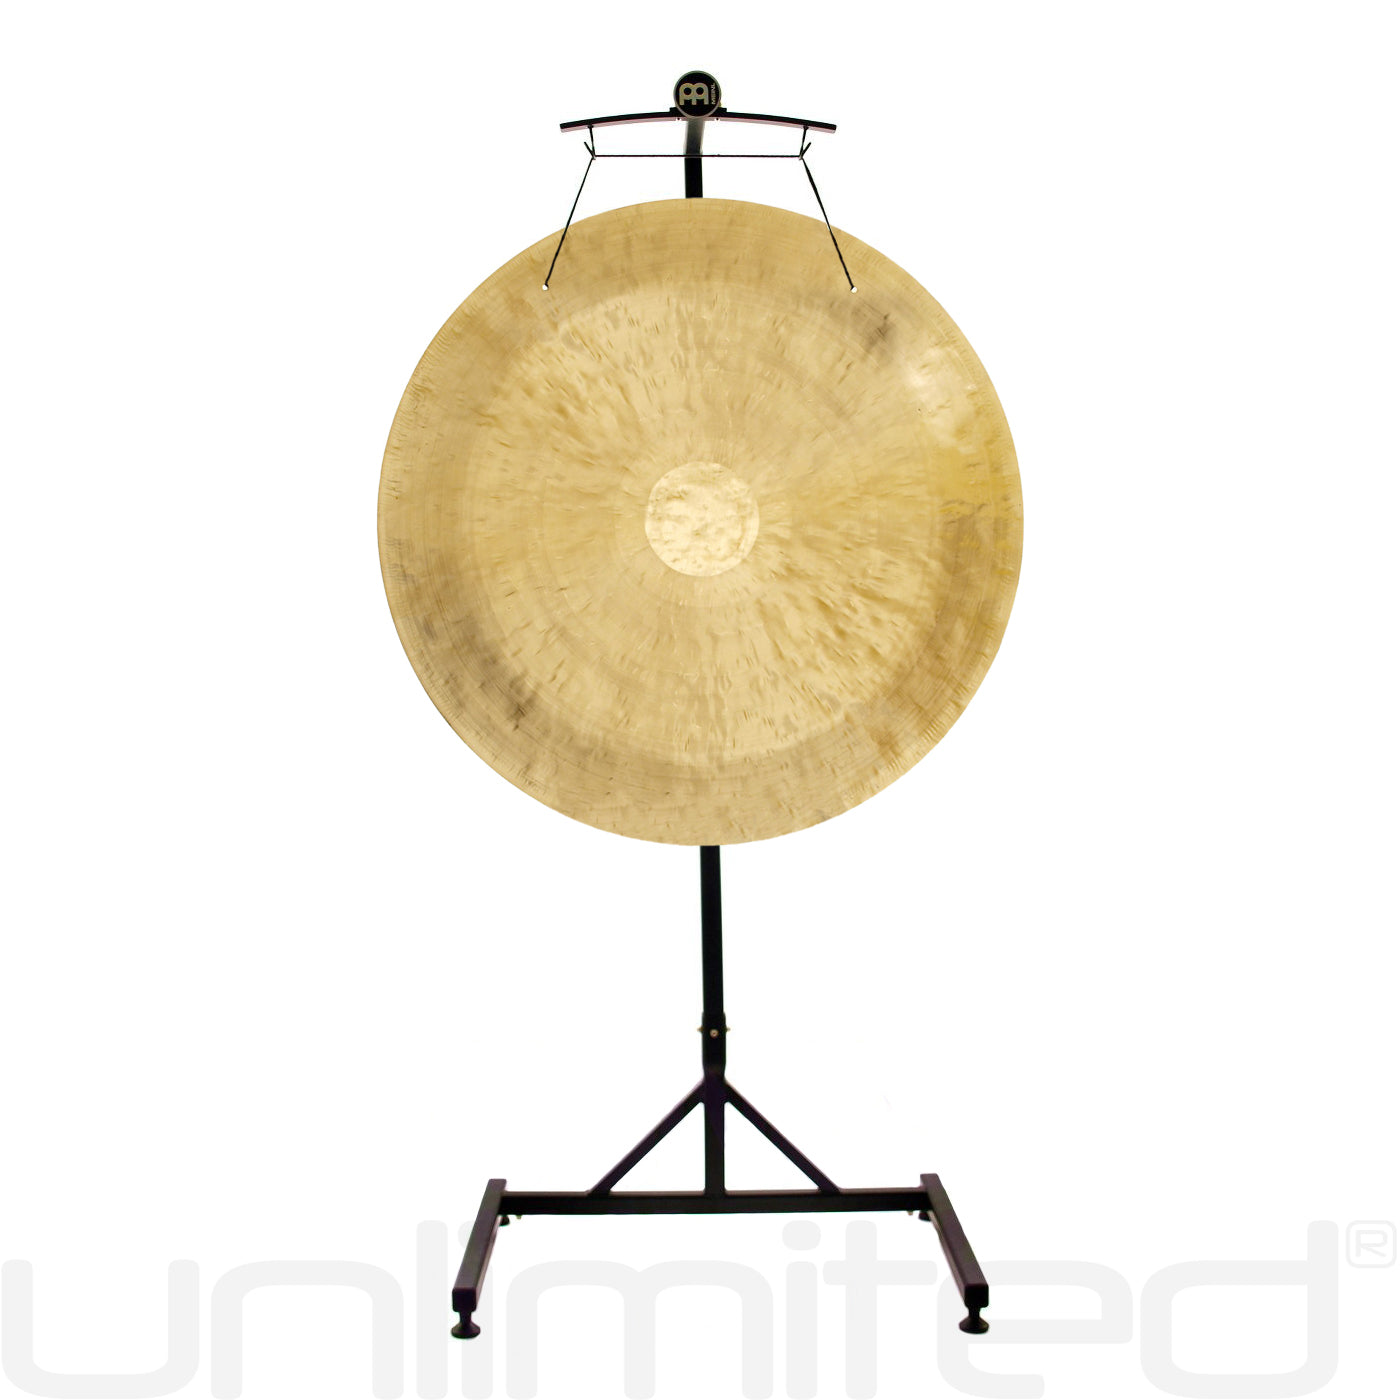 32 to 38 Gongs on Meinl Gong/Tam Tam Pro Stand - Gongs Unlimited